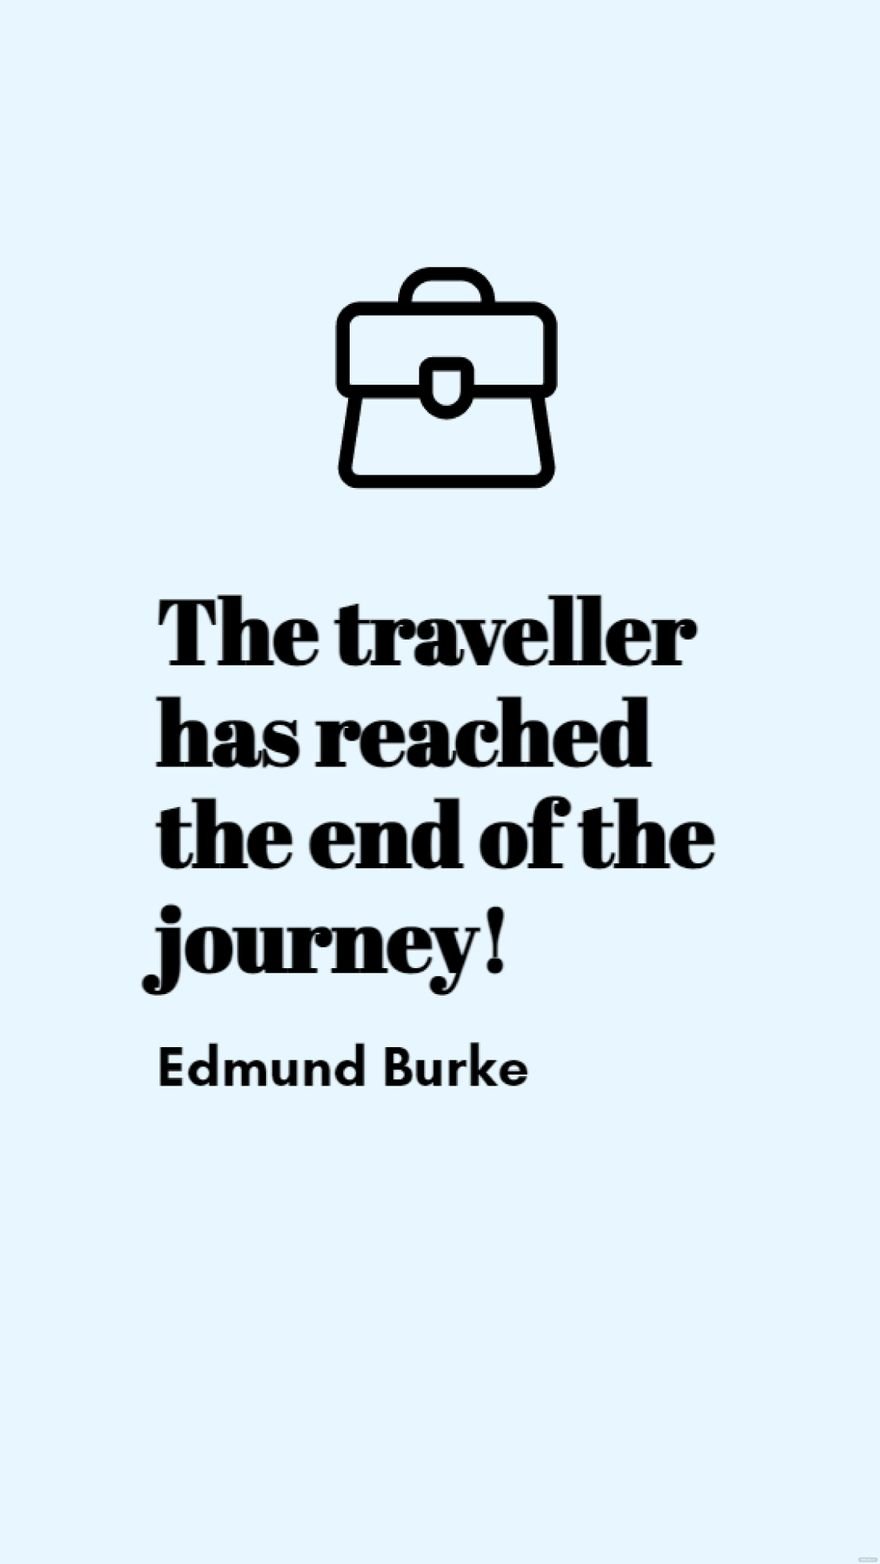 Edmund Burke - The traveller has reached the end of the journey!